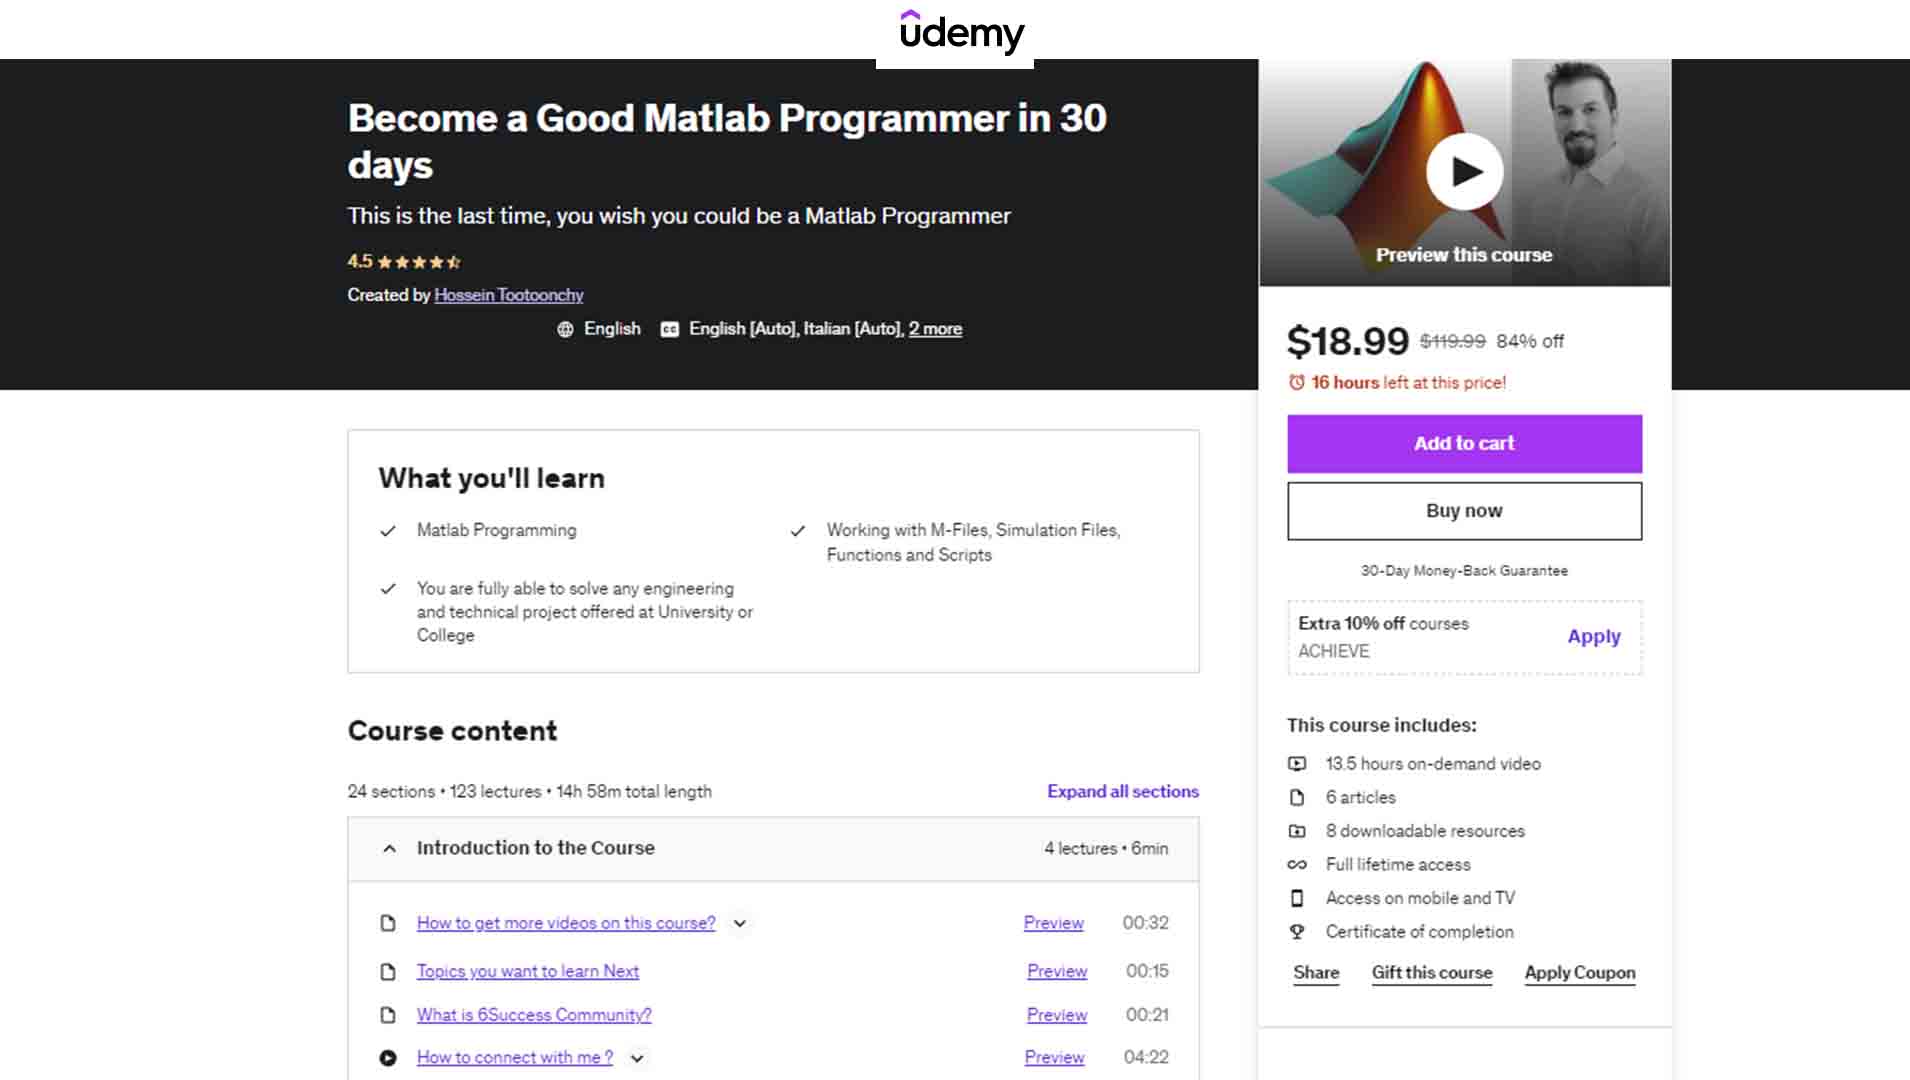 Become a Good Matlab Programmer in 30 days